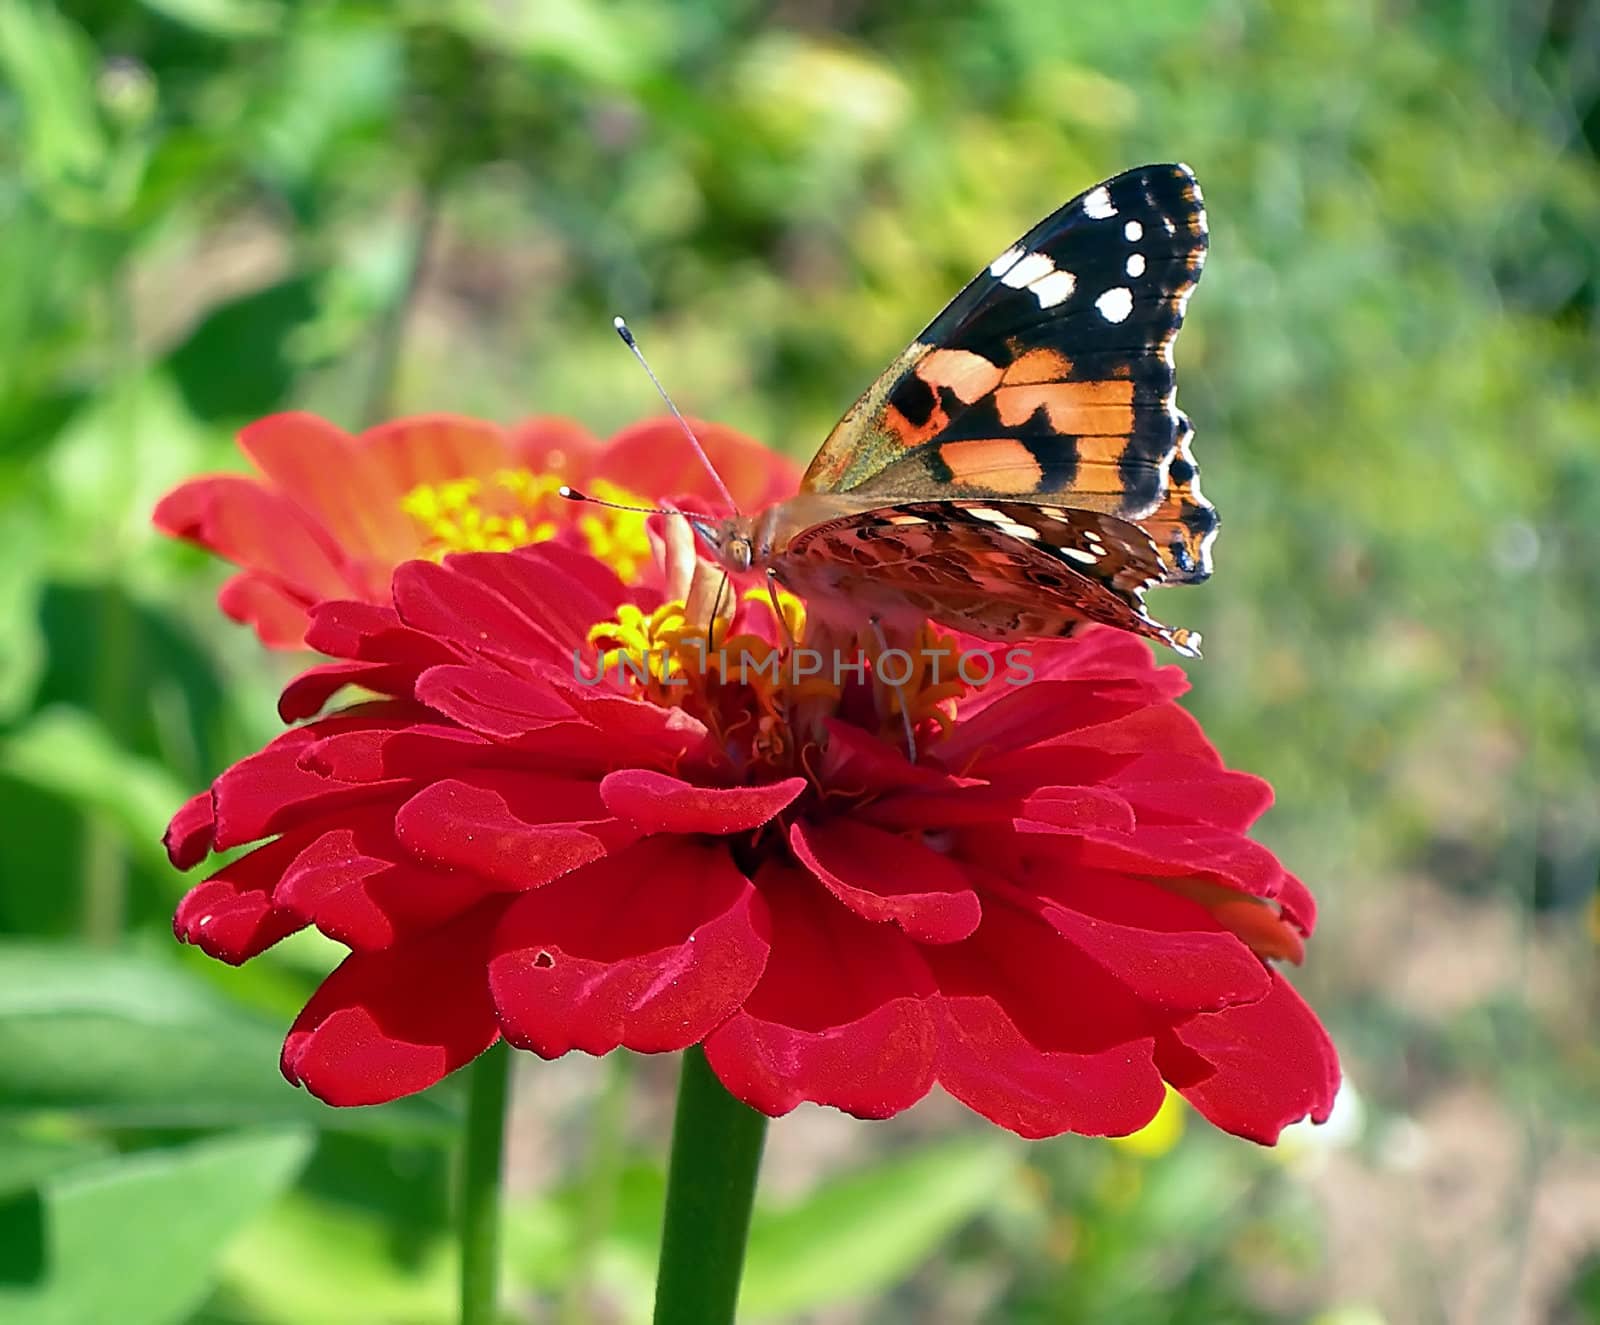           butterfly in the spring garden